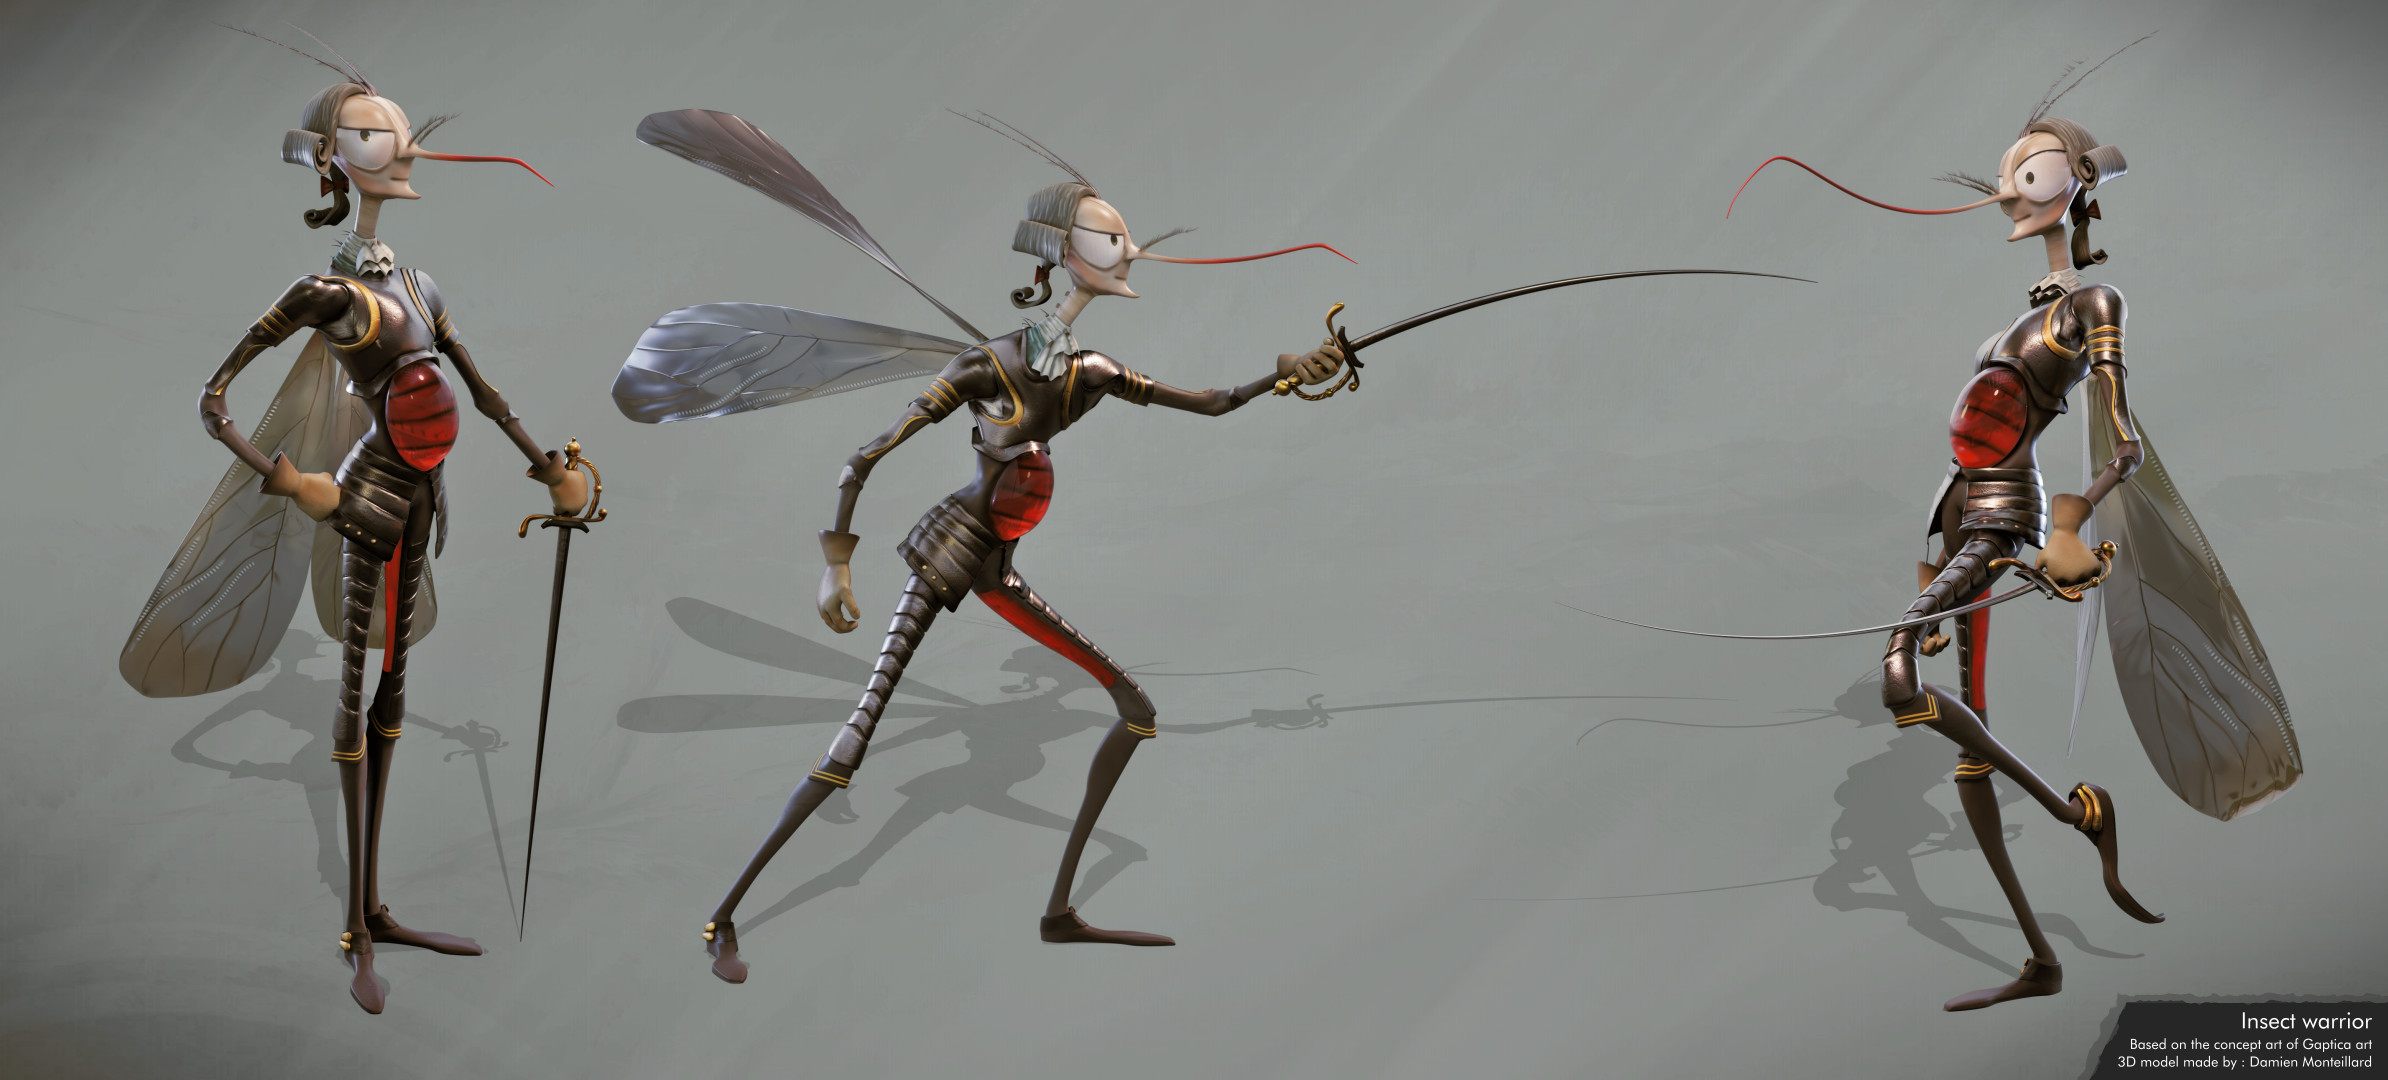 images/graphisme-3d/personnages/insect_warrior